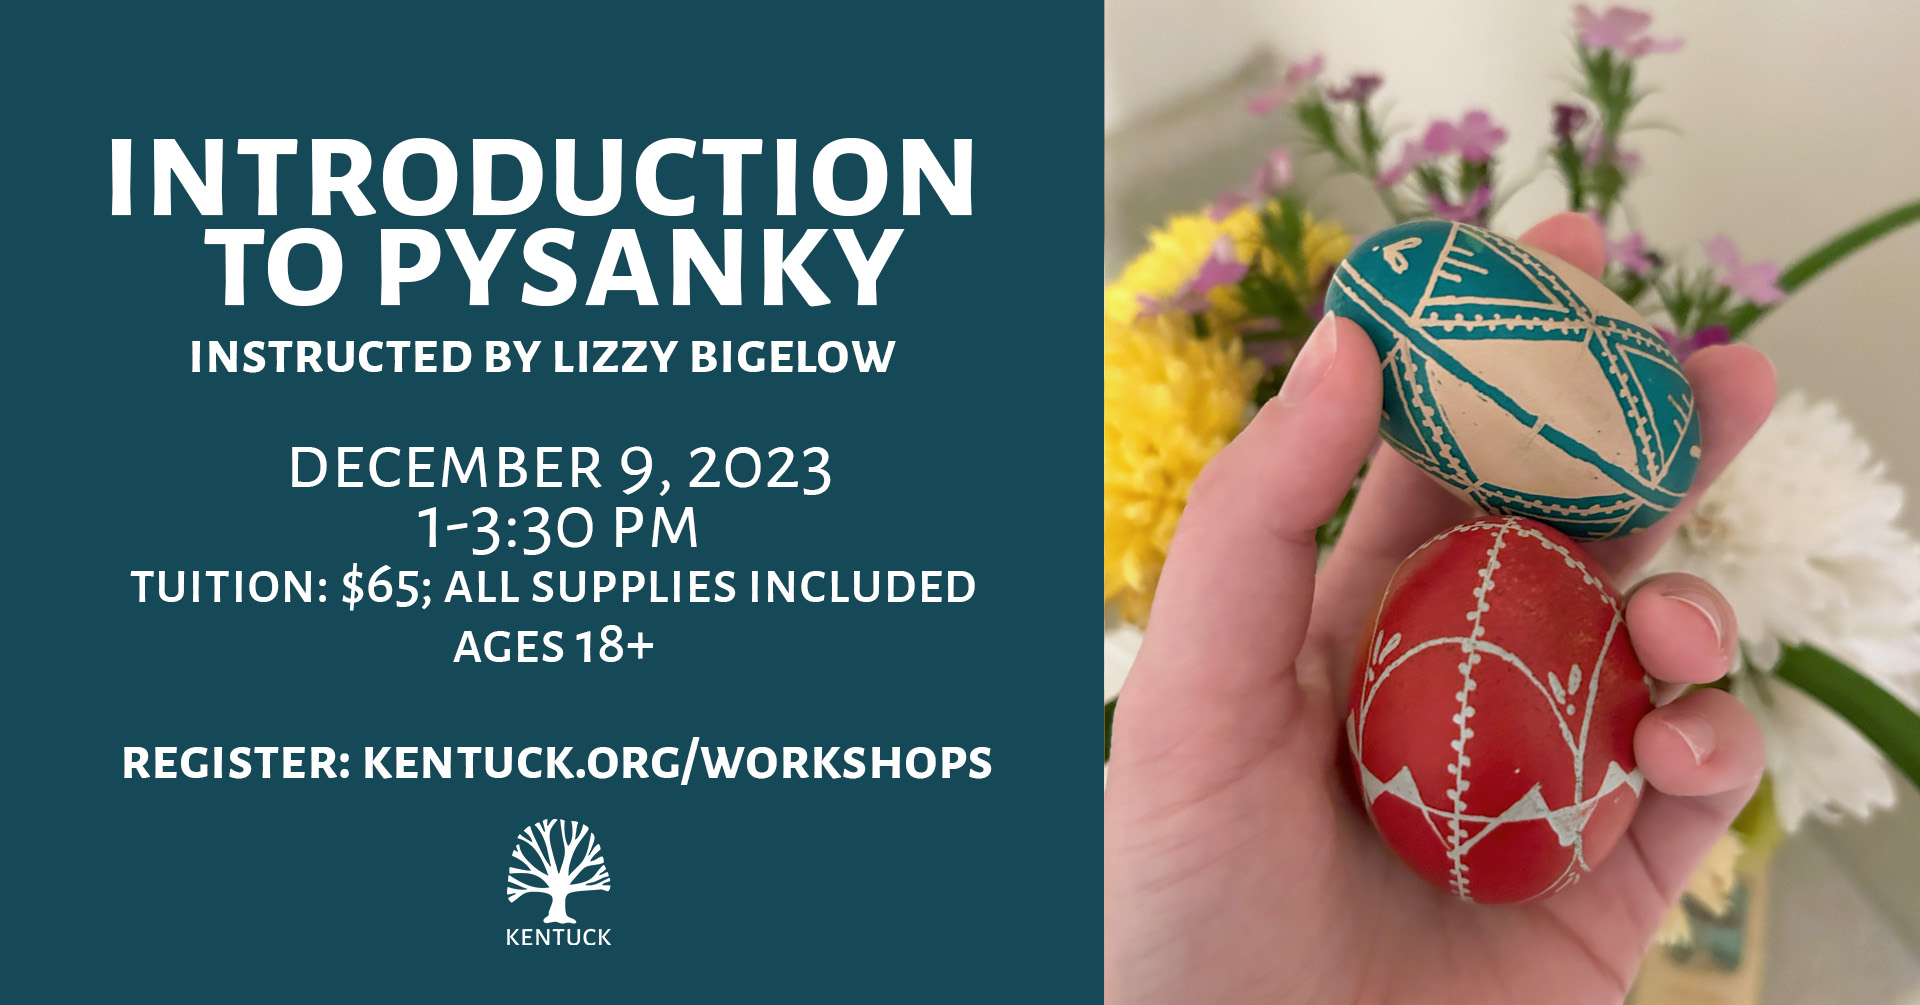 Introduction to Pysanky with Lizzy Bigelow